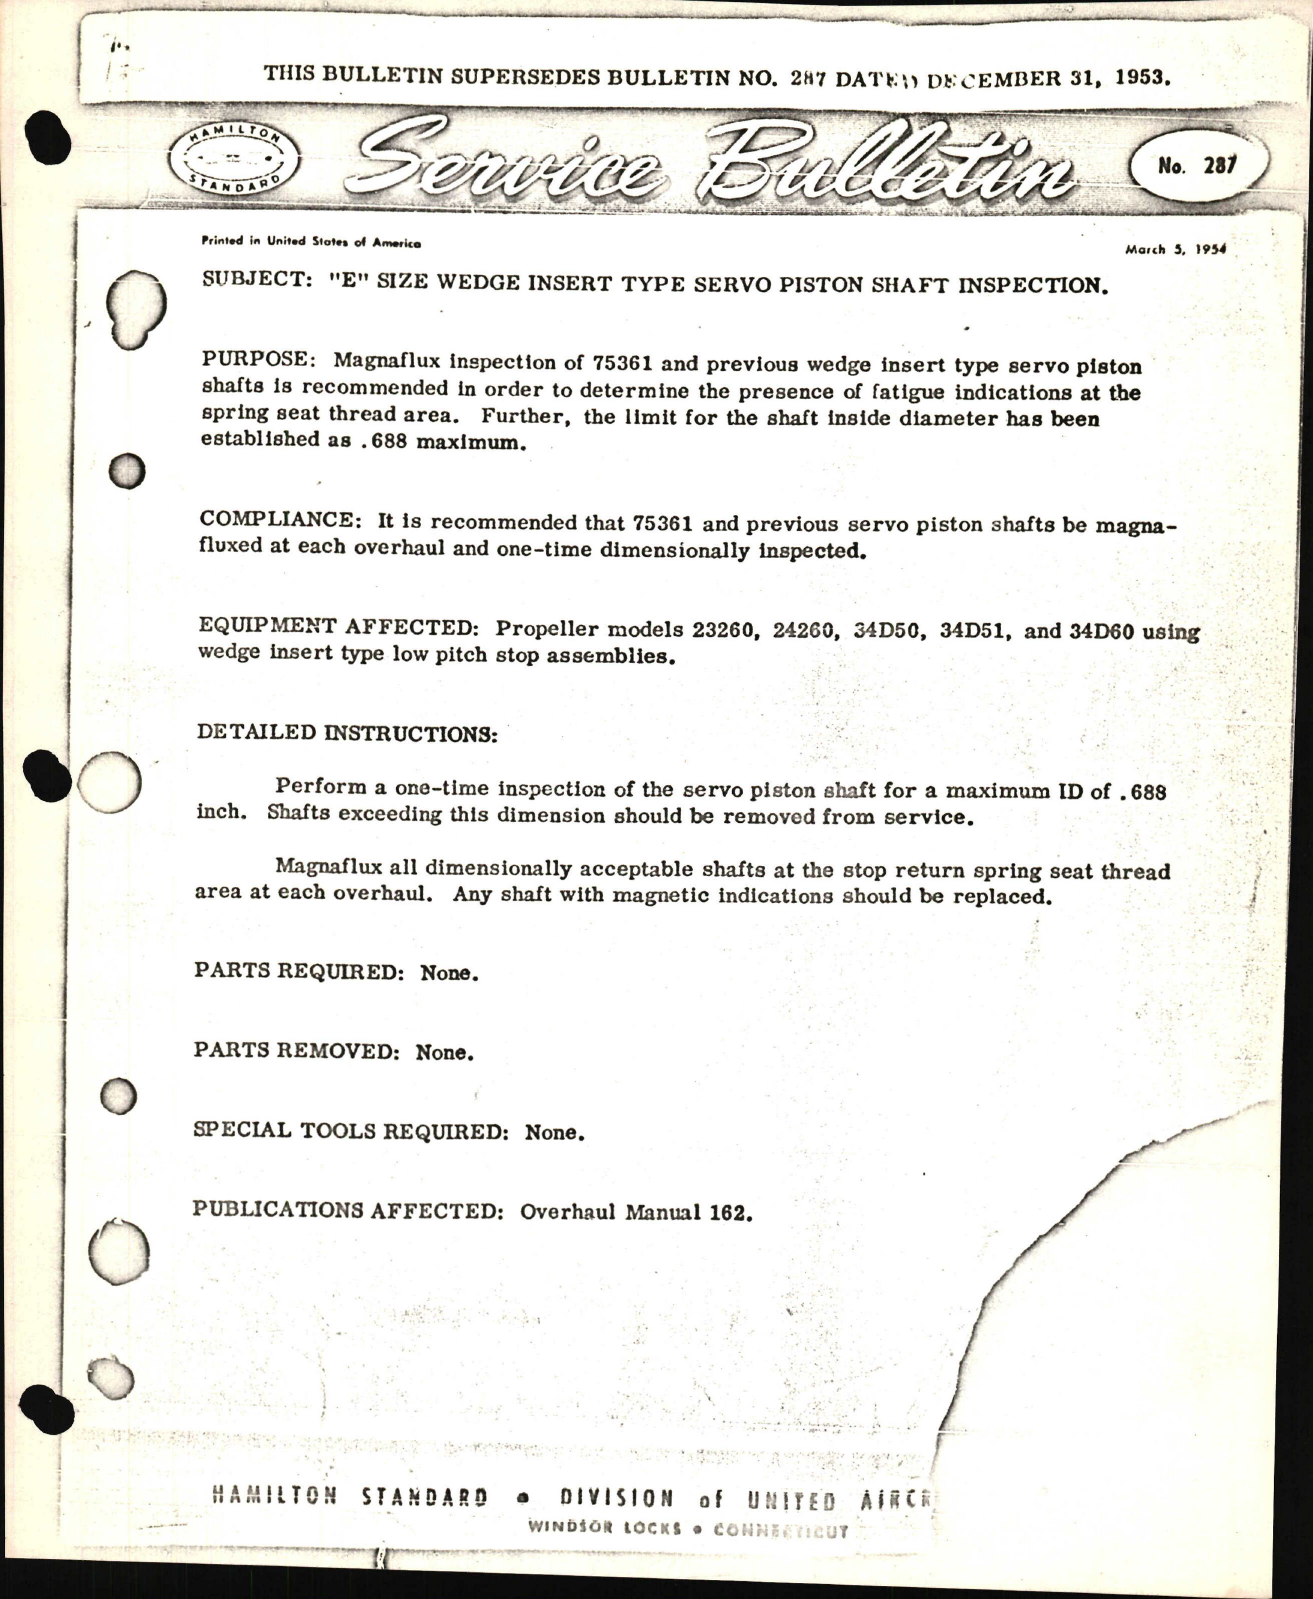 Sample page 1 from AirCorps Library document: 